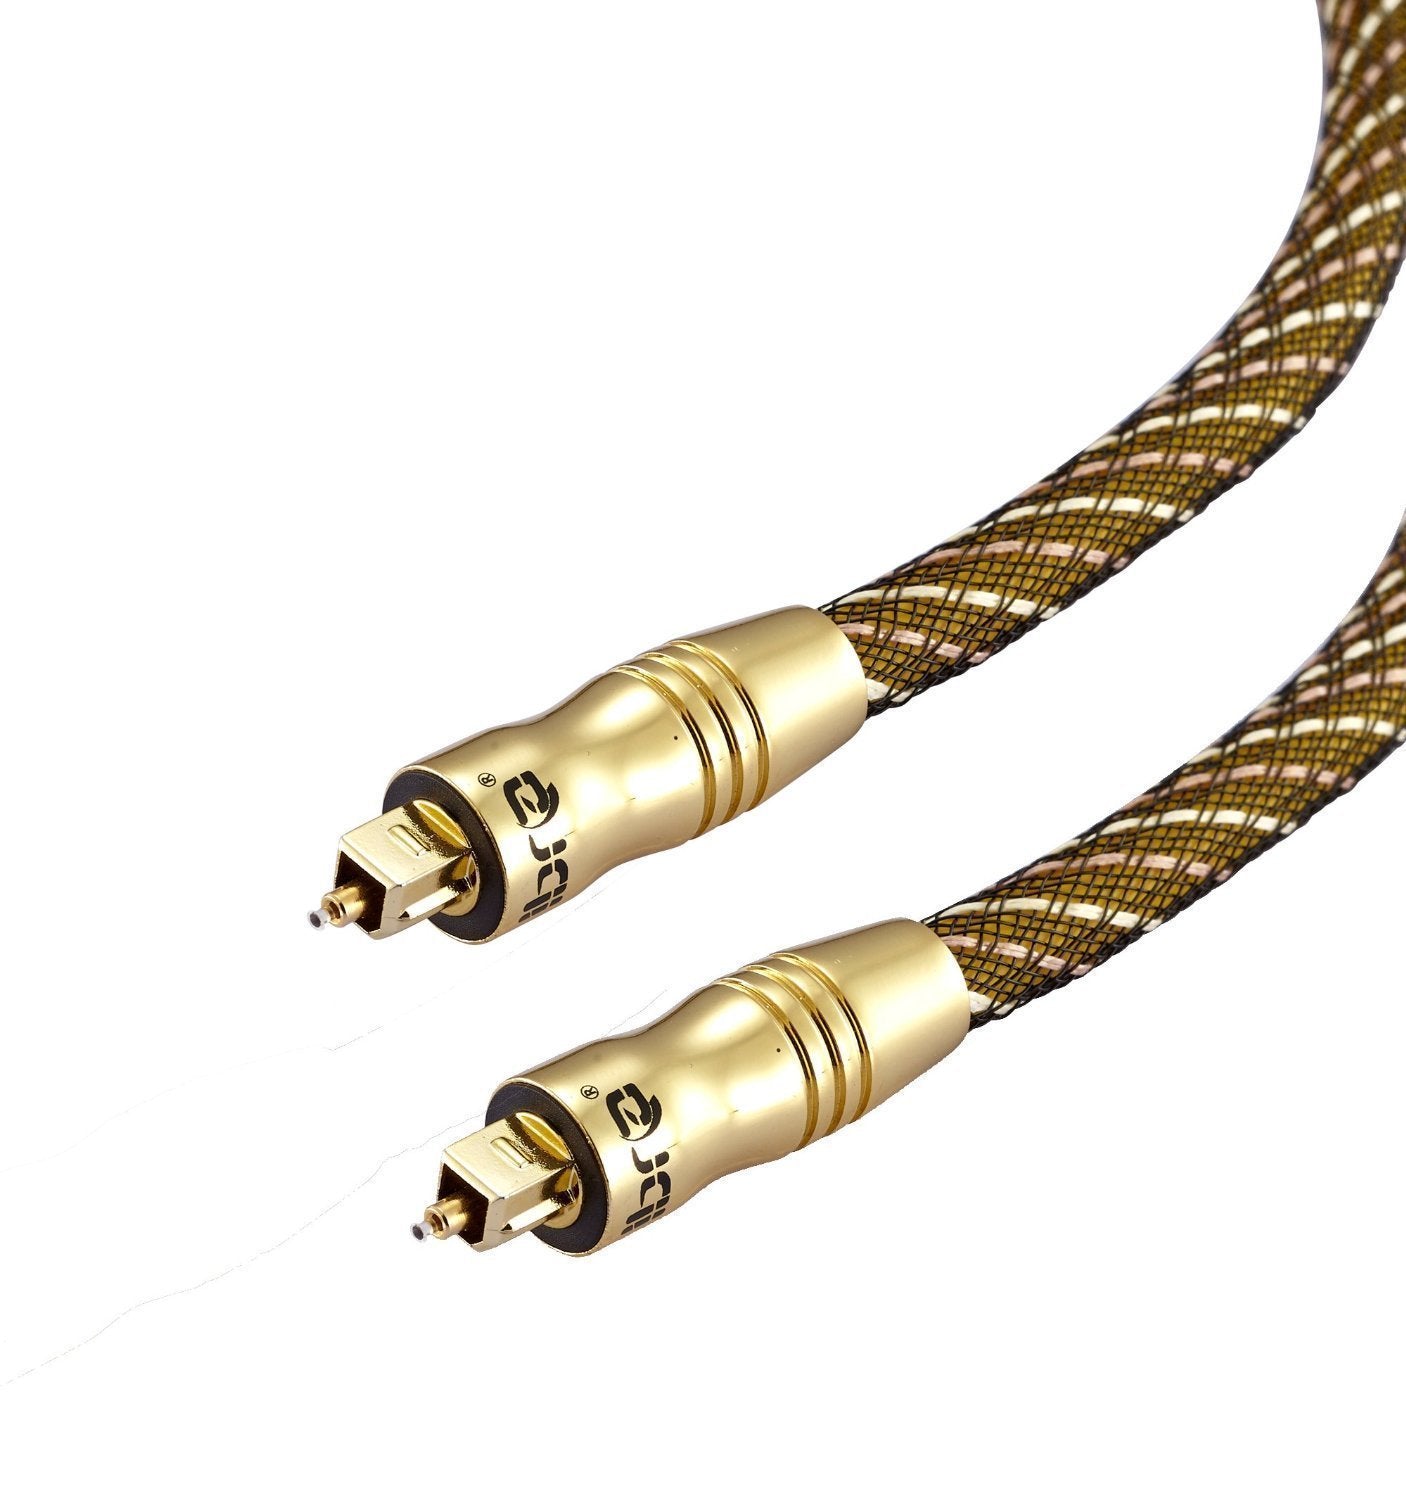 IBRA 0.5M Master Gold Optical TOSLINK Digital Audio Cable - Suitable for PS3, Sky, Sky HD, LCD, LED, Plasma, Blu-ray, Home Cinema Systems, AV Amps